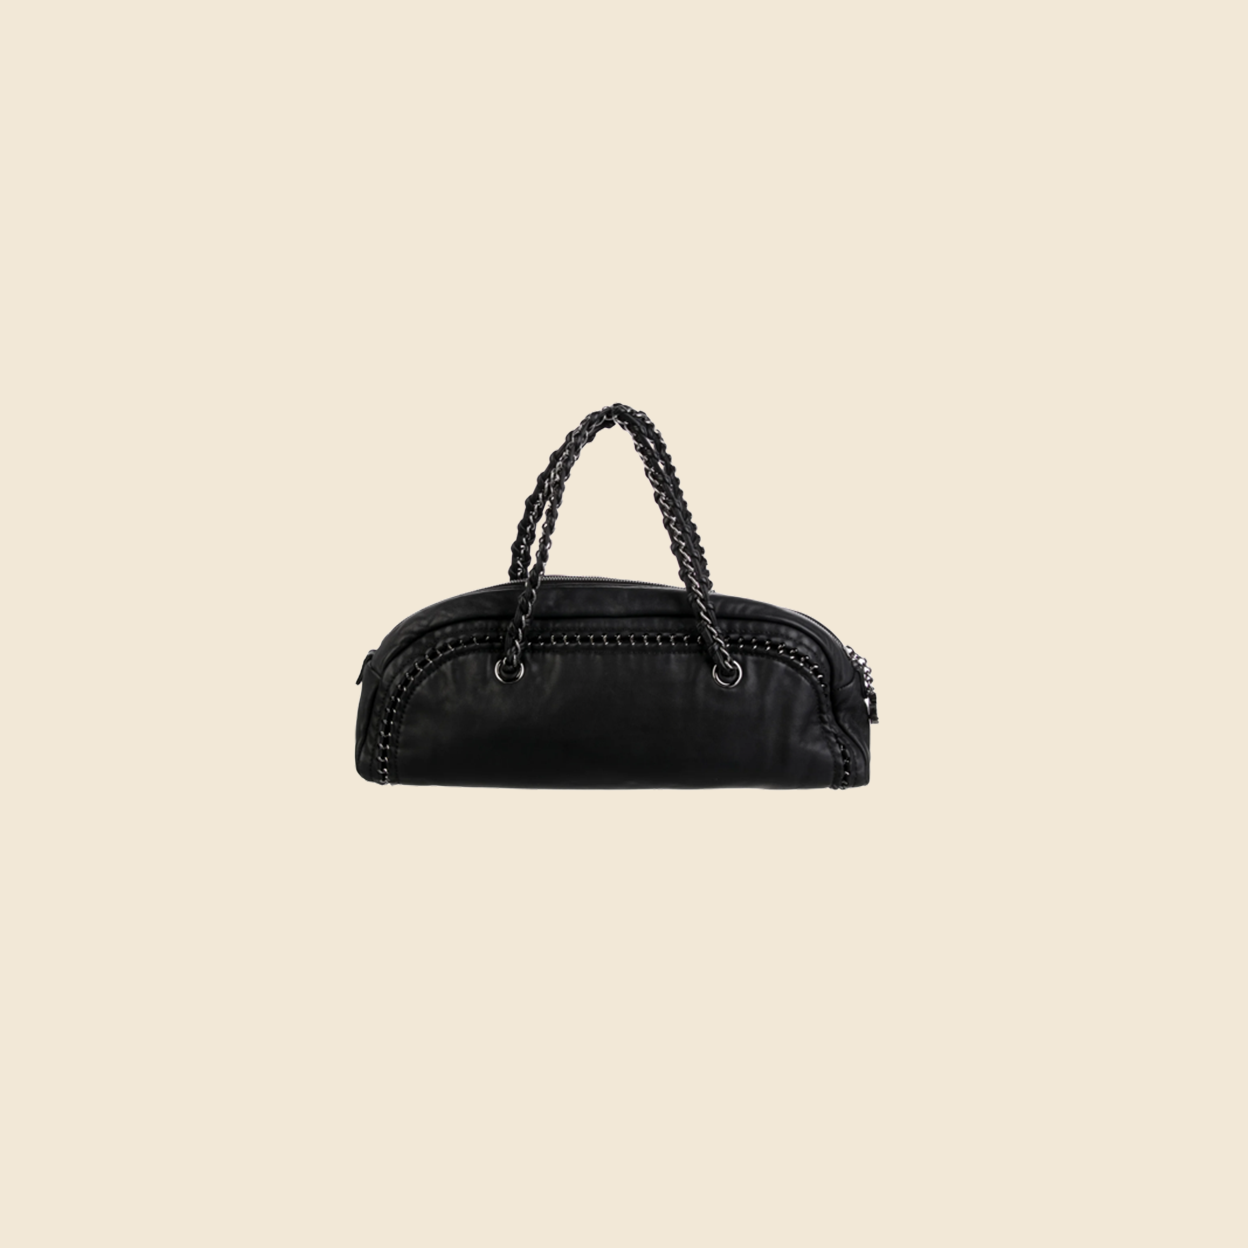 CHANEL 2006 LUXE LIGNE BLACK SMALL BOWLER BAG